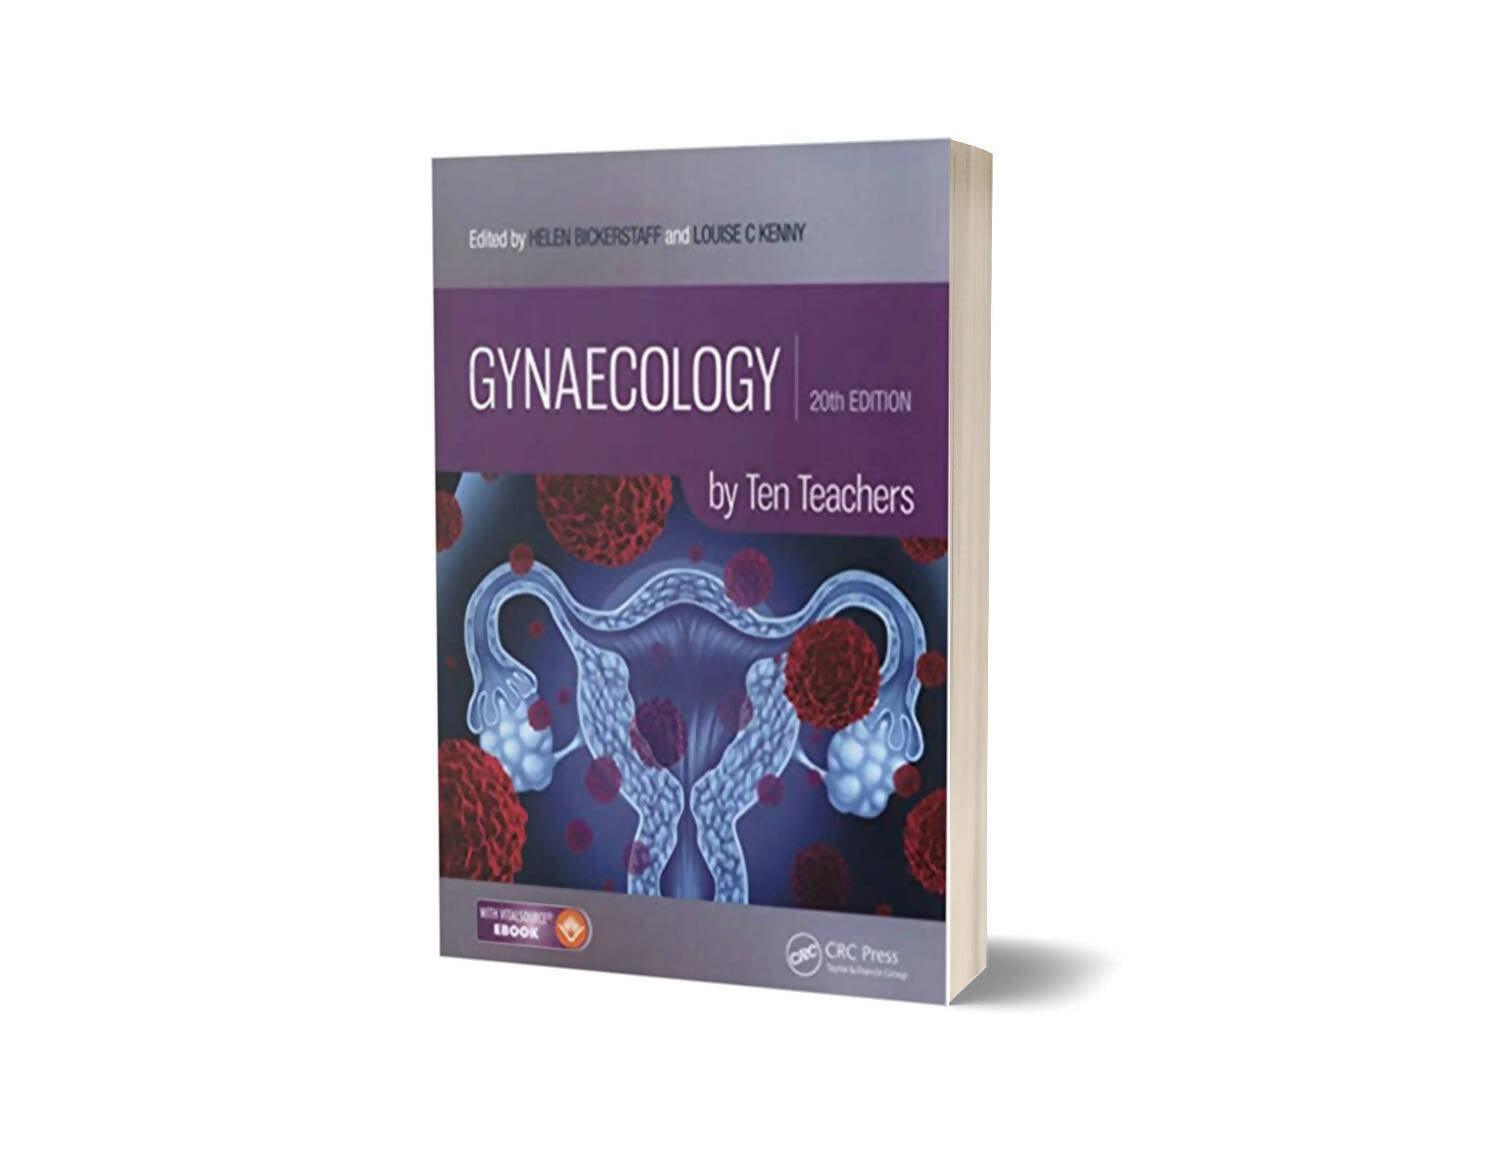 Gynaecology BY TEN TEACHERS 20th Edition - ValueBox